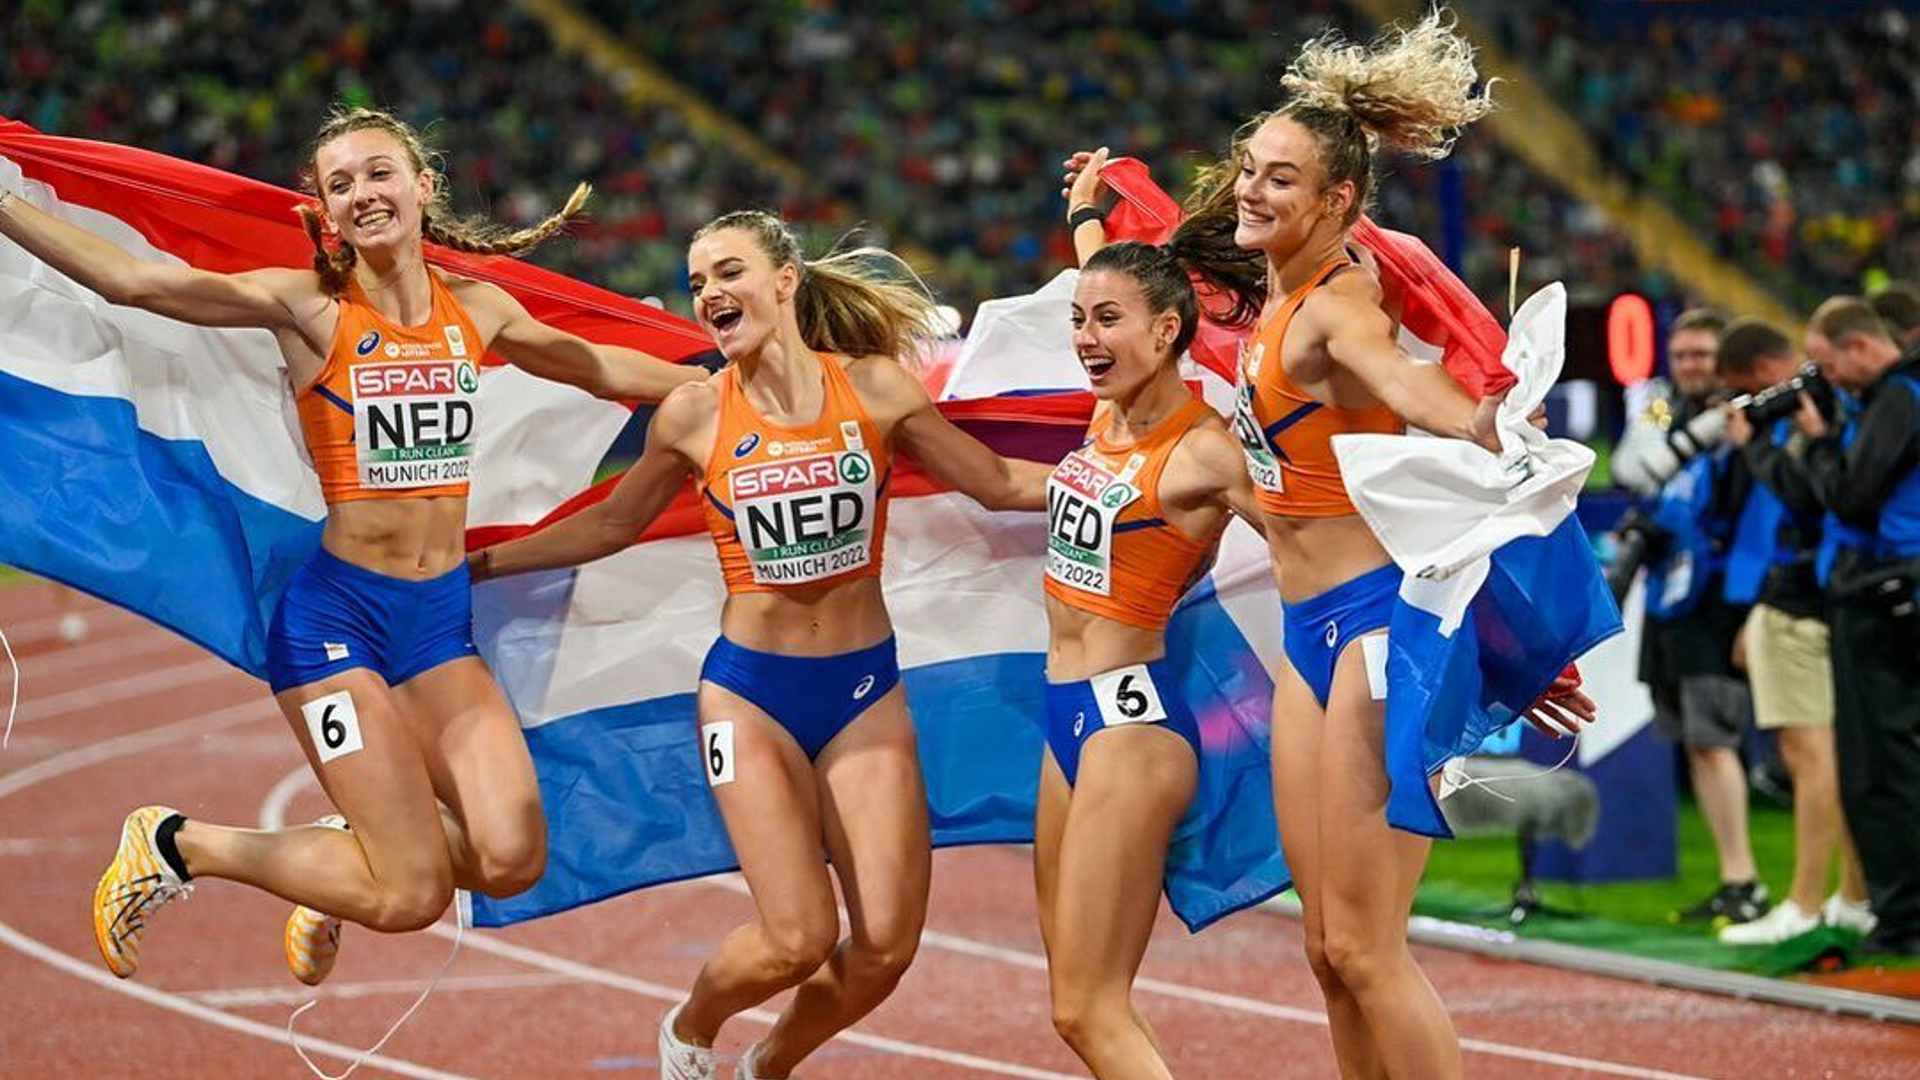 The women's 4 X400 m relay team after winning the gold medal in European Championships 2022 (Image Credits - Instagram/ @liekeklaver)